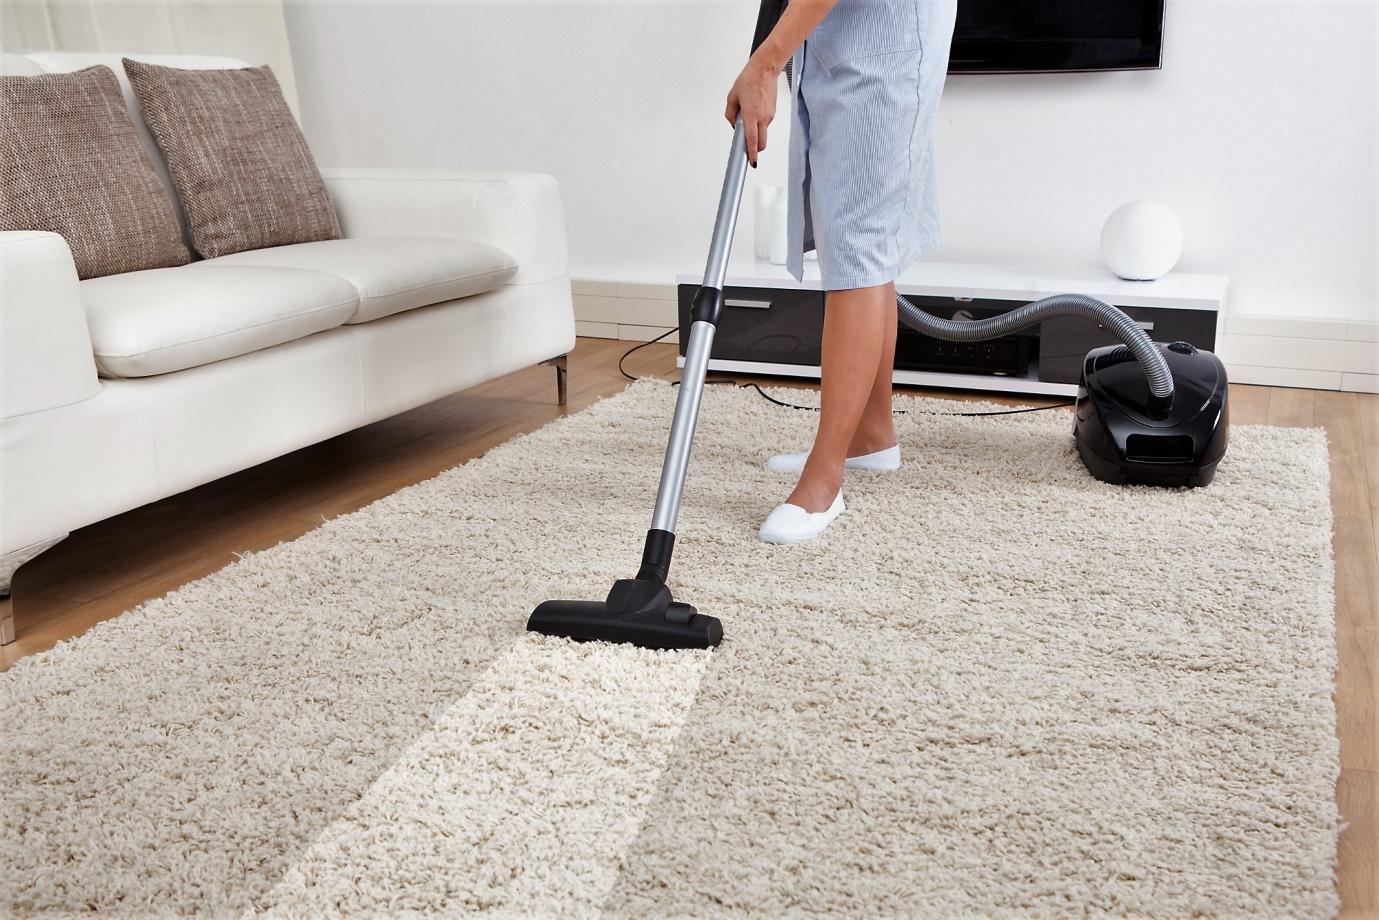 How To Find The Carpet Cleaning Service That's Right For You?